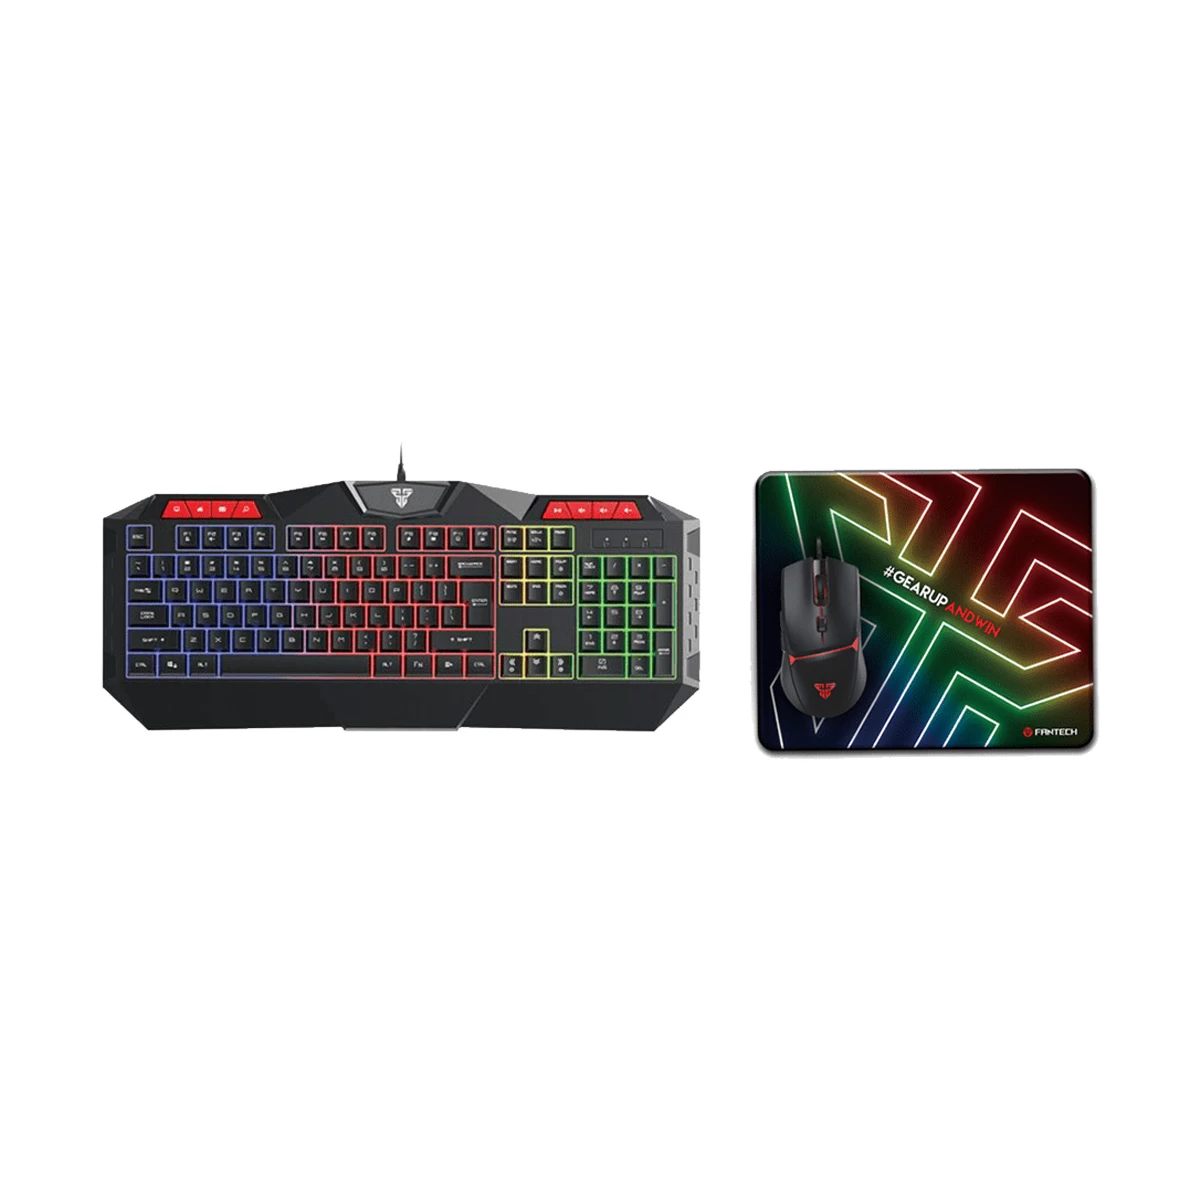 Fantech P31 USB Wired Black Gaming Keyboard, Mouse & Mouse Pad Combo